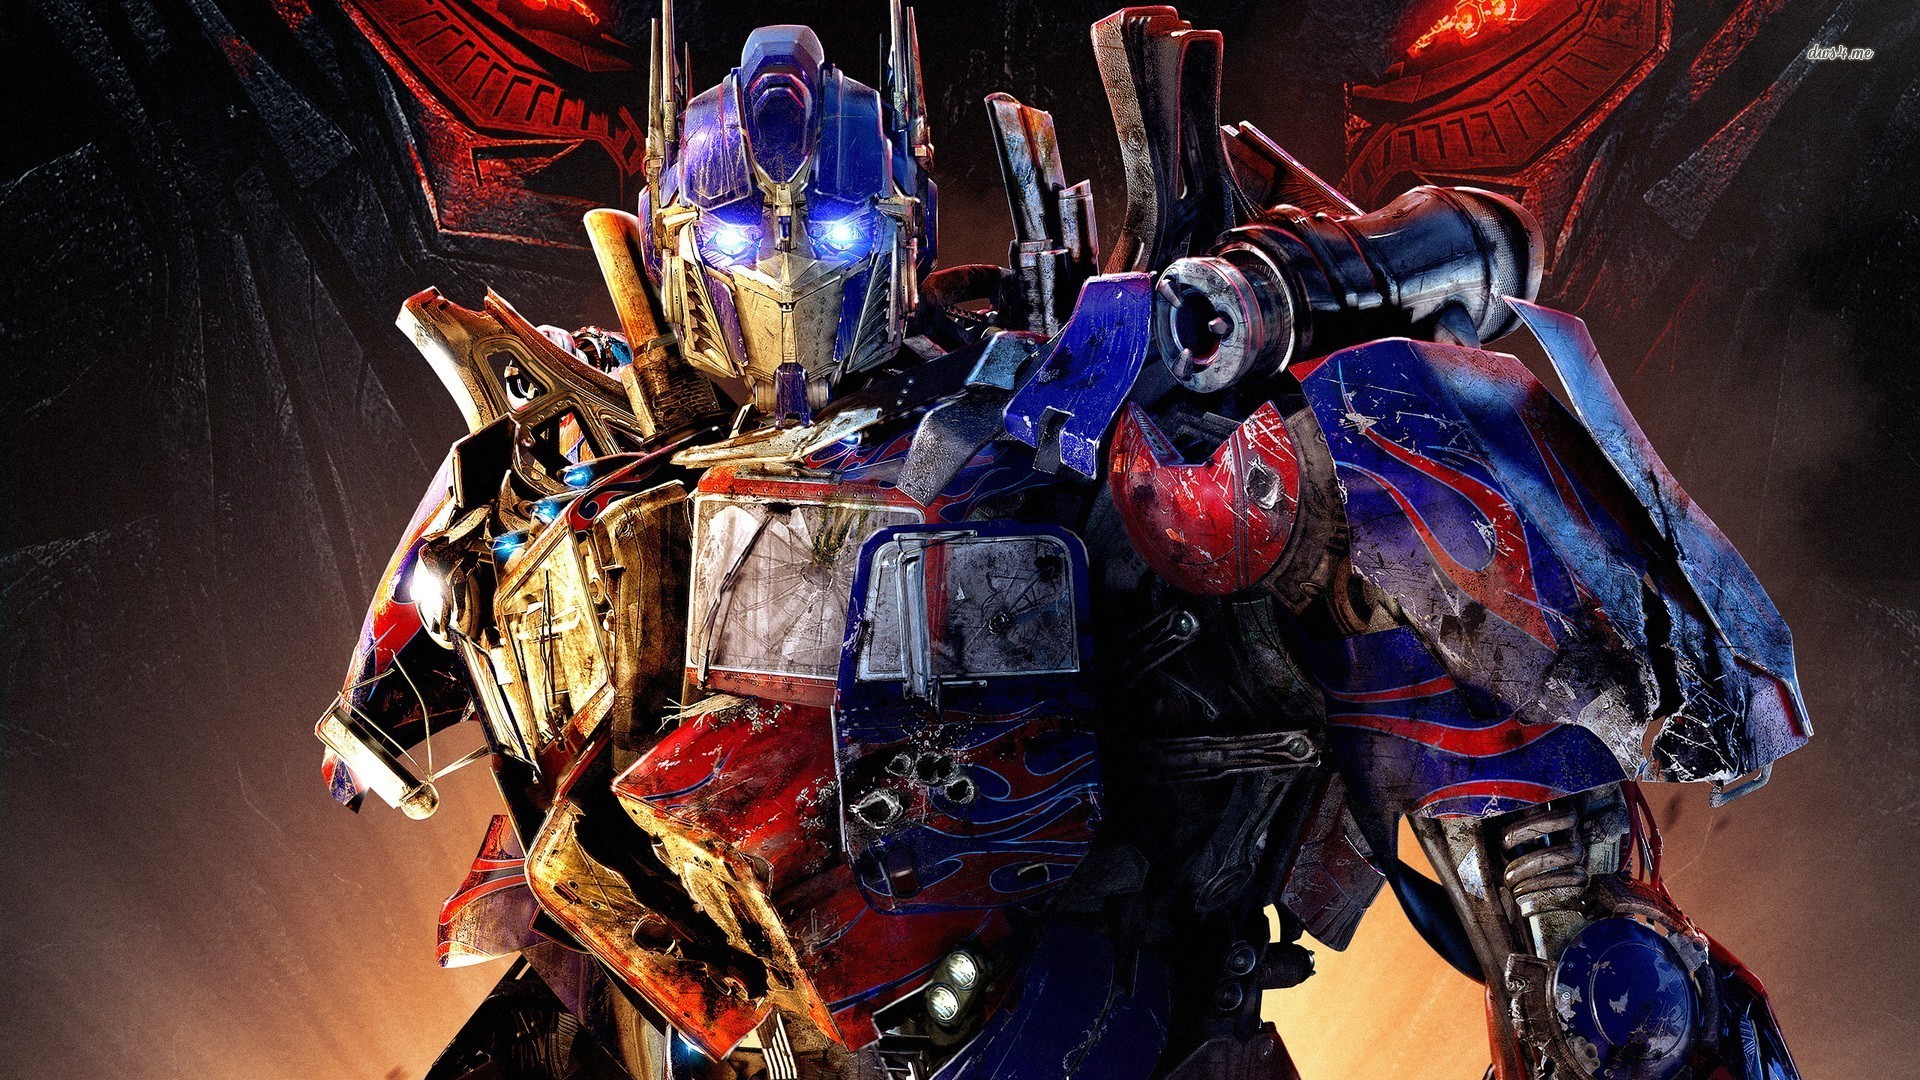 1920x1080 Transformers 2 Optimus Prime, HDQ Wallpapers For Free